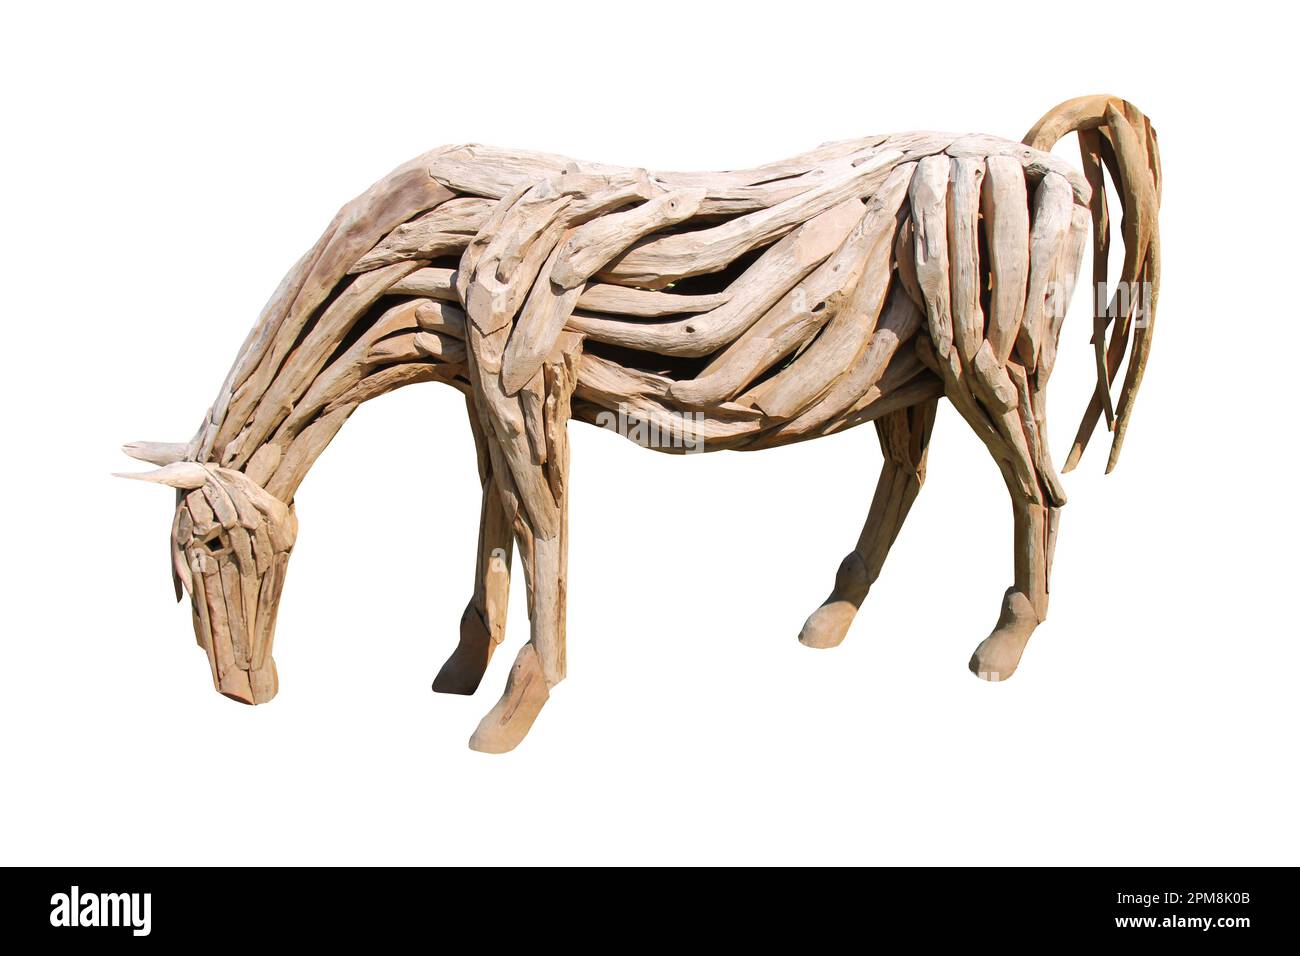 A Large Statue of a Horse Made from Wooden Pieces. Stock Photo